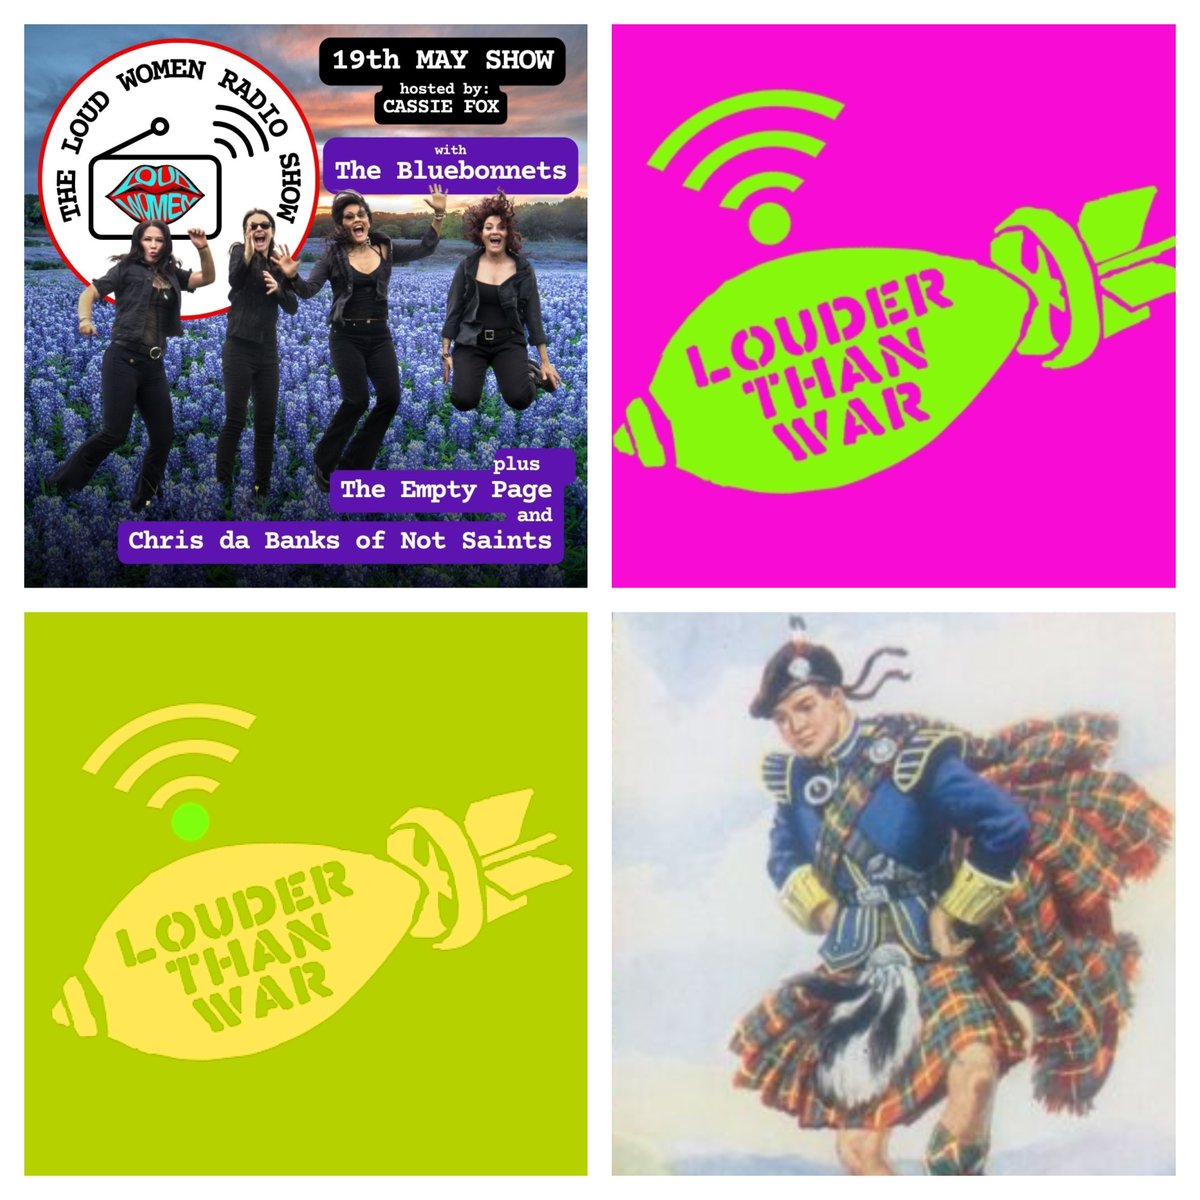 Today on LTW Radio! s2.radio.co/sab795a38d/lis…
5pm—LOUD WOMEN Show
7pm—Global Sounds w/WorldCelt @TalkingGigs 
Cassie Fox hosts this @loudwomenclub show, presenting new music + interviews w/@thebluebonnets feat @kathy_valentine, Kel + Liz from @thmptypg + founder of @NotSaintsUK